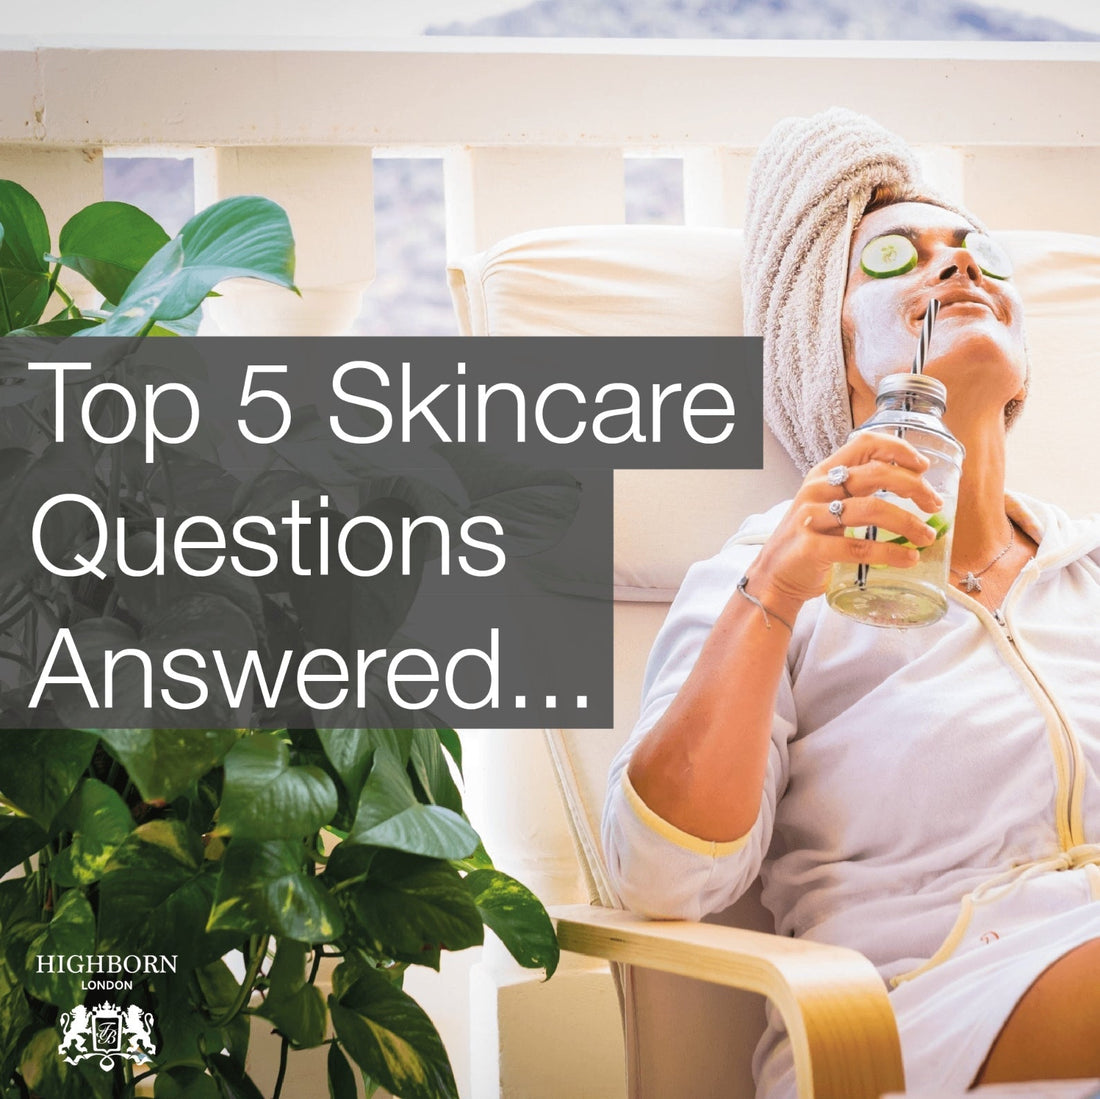 5 Common Skincare Questions Answered - HighBorn London